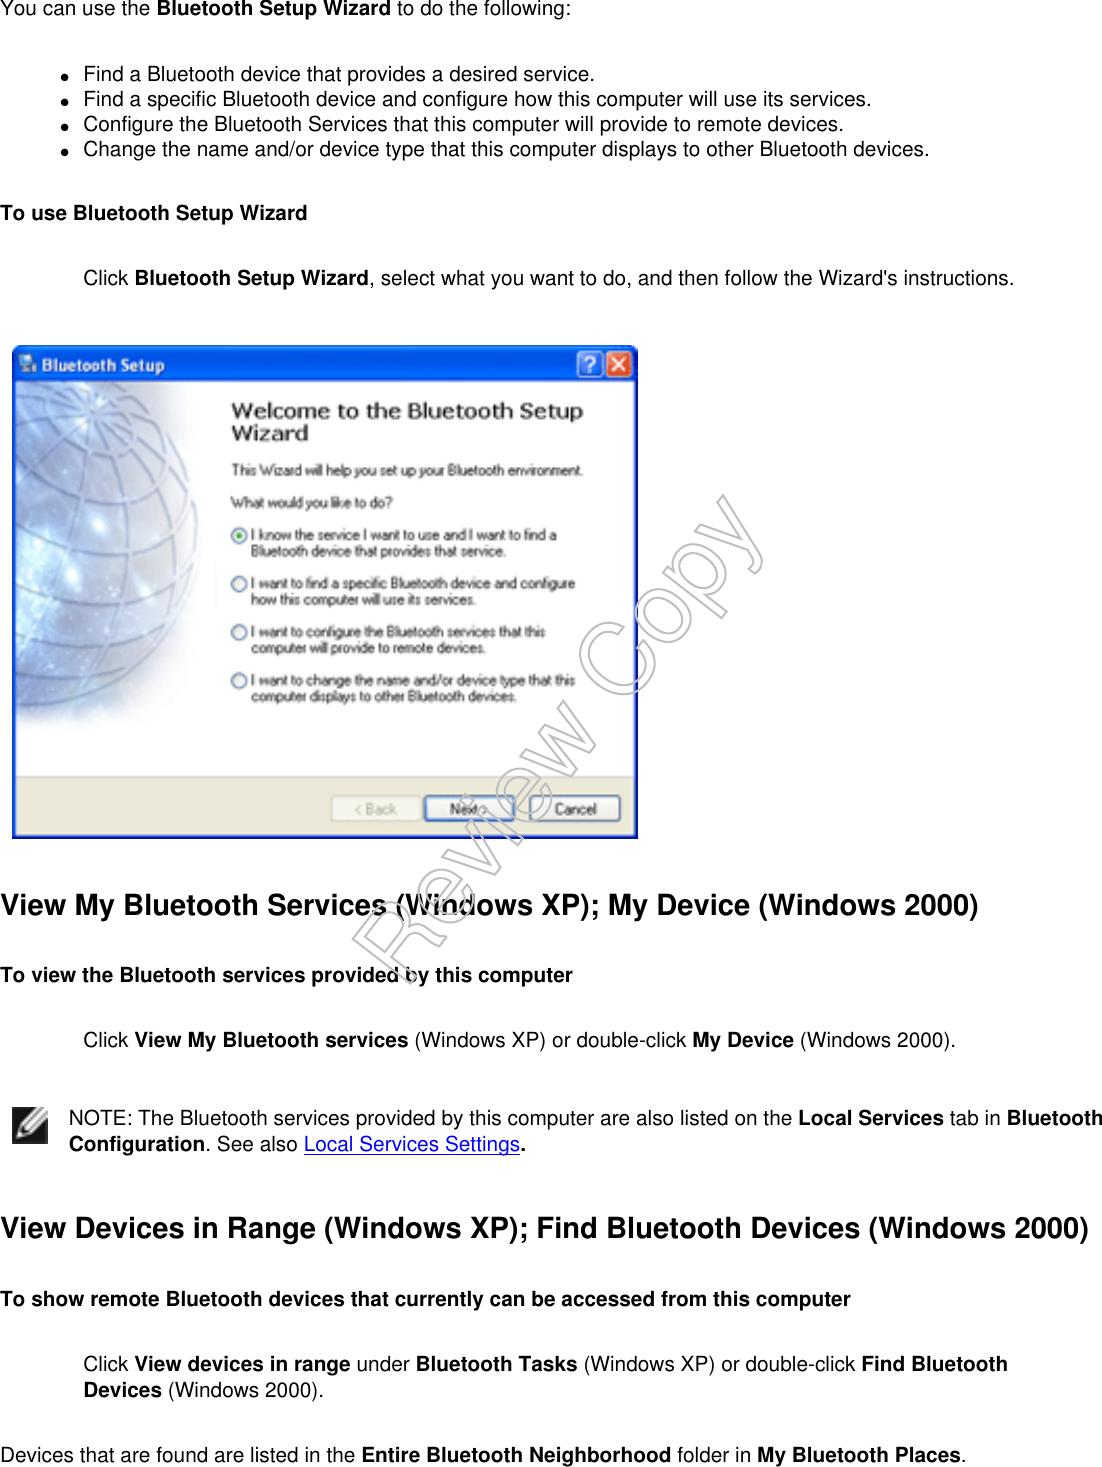 You can use the Bluetooth Setup Wizard to do the following:●     Find a Bluetooth device that provides a desired service.●     Find a specific Bluetooth device and configure how this computer will use its services.●     Configure the Bluetooth Services that this computer will provide to remote devices.●     Change the name and/or device type that this computer displays to other Bluetooth devices.To use Bluetooth Setup WizardClick Bluetooth Setup Wizard, select what you want to do, and then follow the Wizard&apos;s instructions.View My Bluetooth Services (Windows XP); My Device (Windows 2000)To view the Bluetooth services provided by this computerClick View My Bluetooth services (Windows XP) or double-click My Device (Windows 2000).NOTE: The Bluetooth services provided by this computer are also listed on the Local Services tab in Bluetooth Configuration. See also Local Services Settings.View Devices in Range (Windows XP); Find Bluetooth Devices (Windows 2000)To show remote Bluetooth devices that currently can be accessed from this computerClick View devices in range under Bluetooth Tasks (Windows XP) or double-click Find Bluetooth Devices (Windows 2000).Devices that are found are listed in the Entire Bluetooth Neighborhood folder in My Bluetooth Places. Review Copy